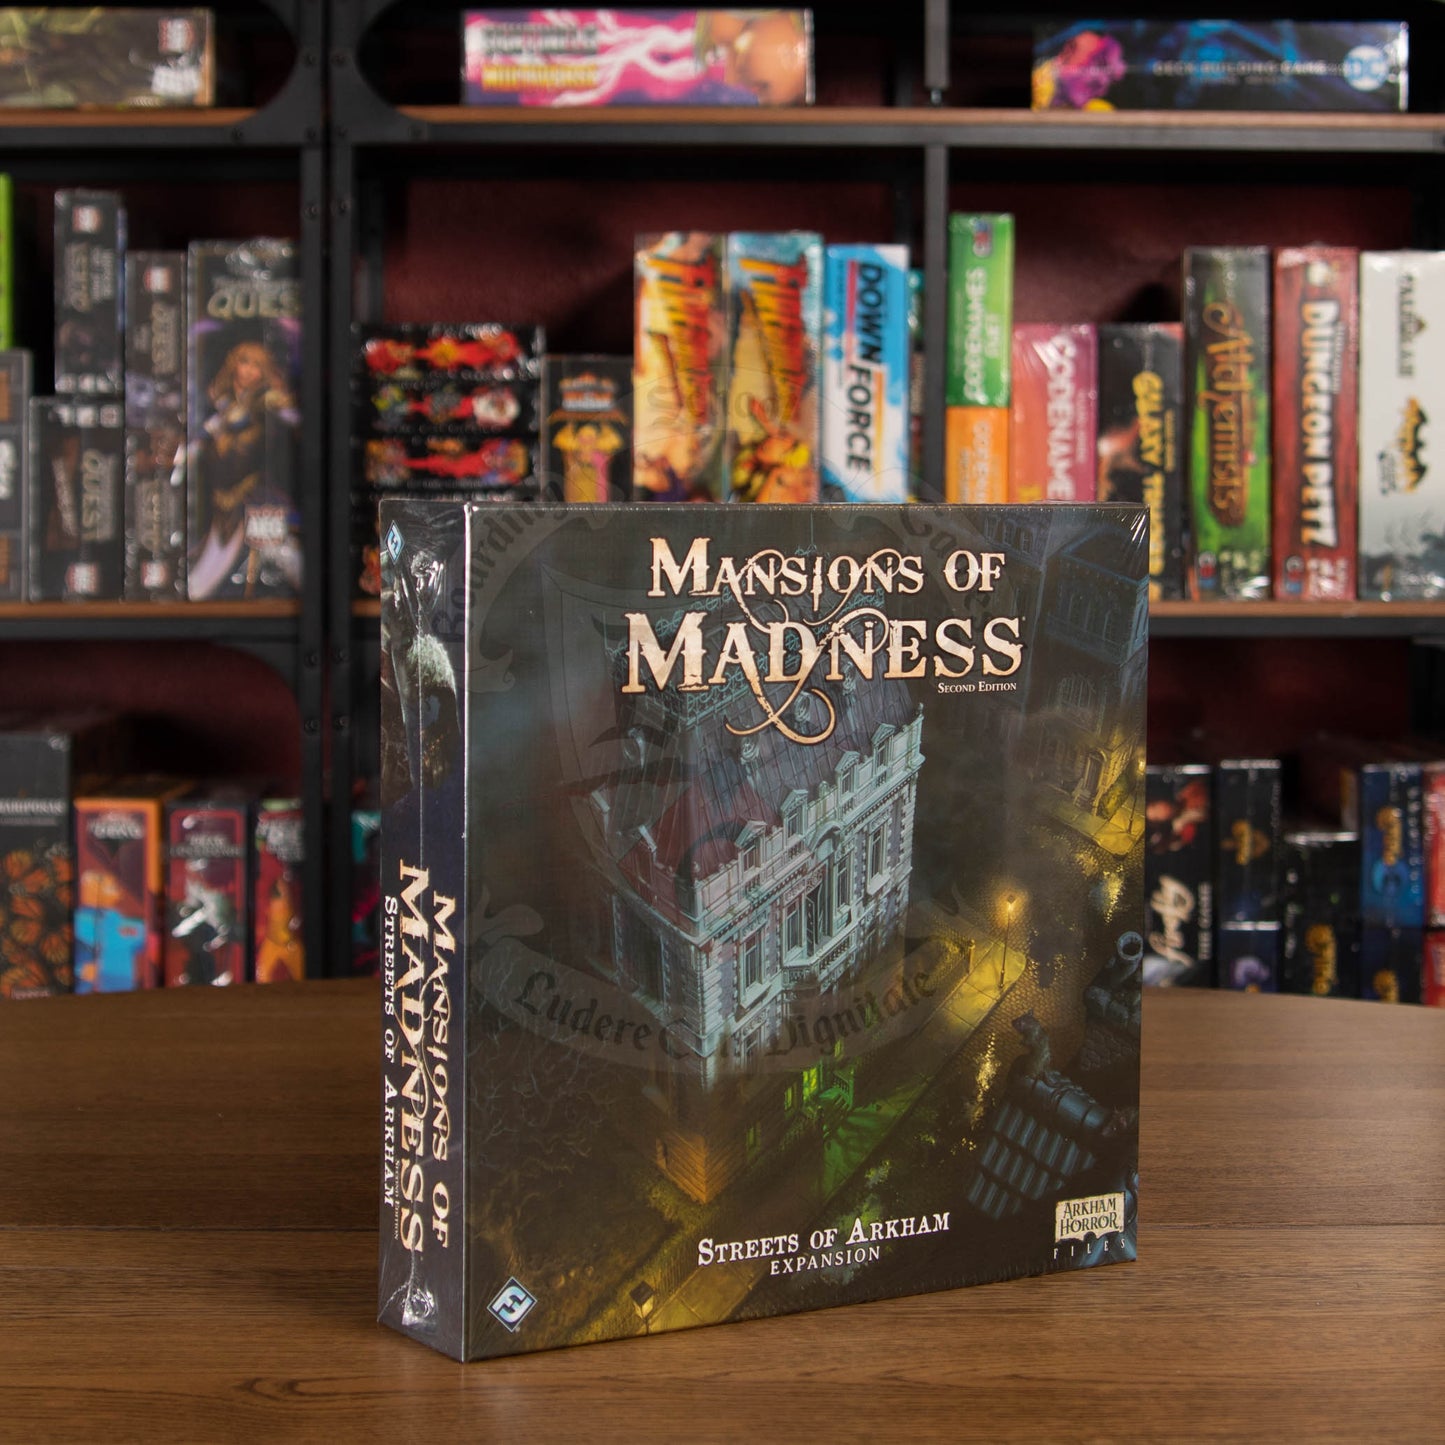 (BSG Certified USED) Mansions of Madness - Streets of Arkham